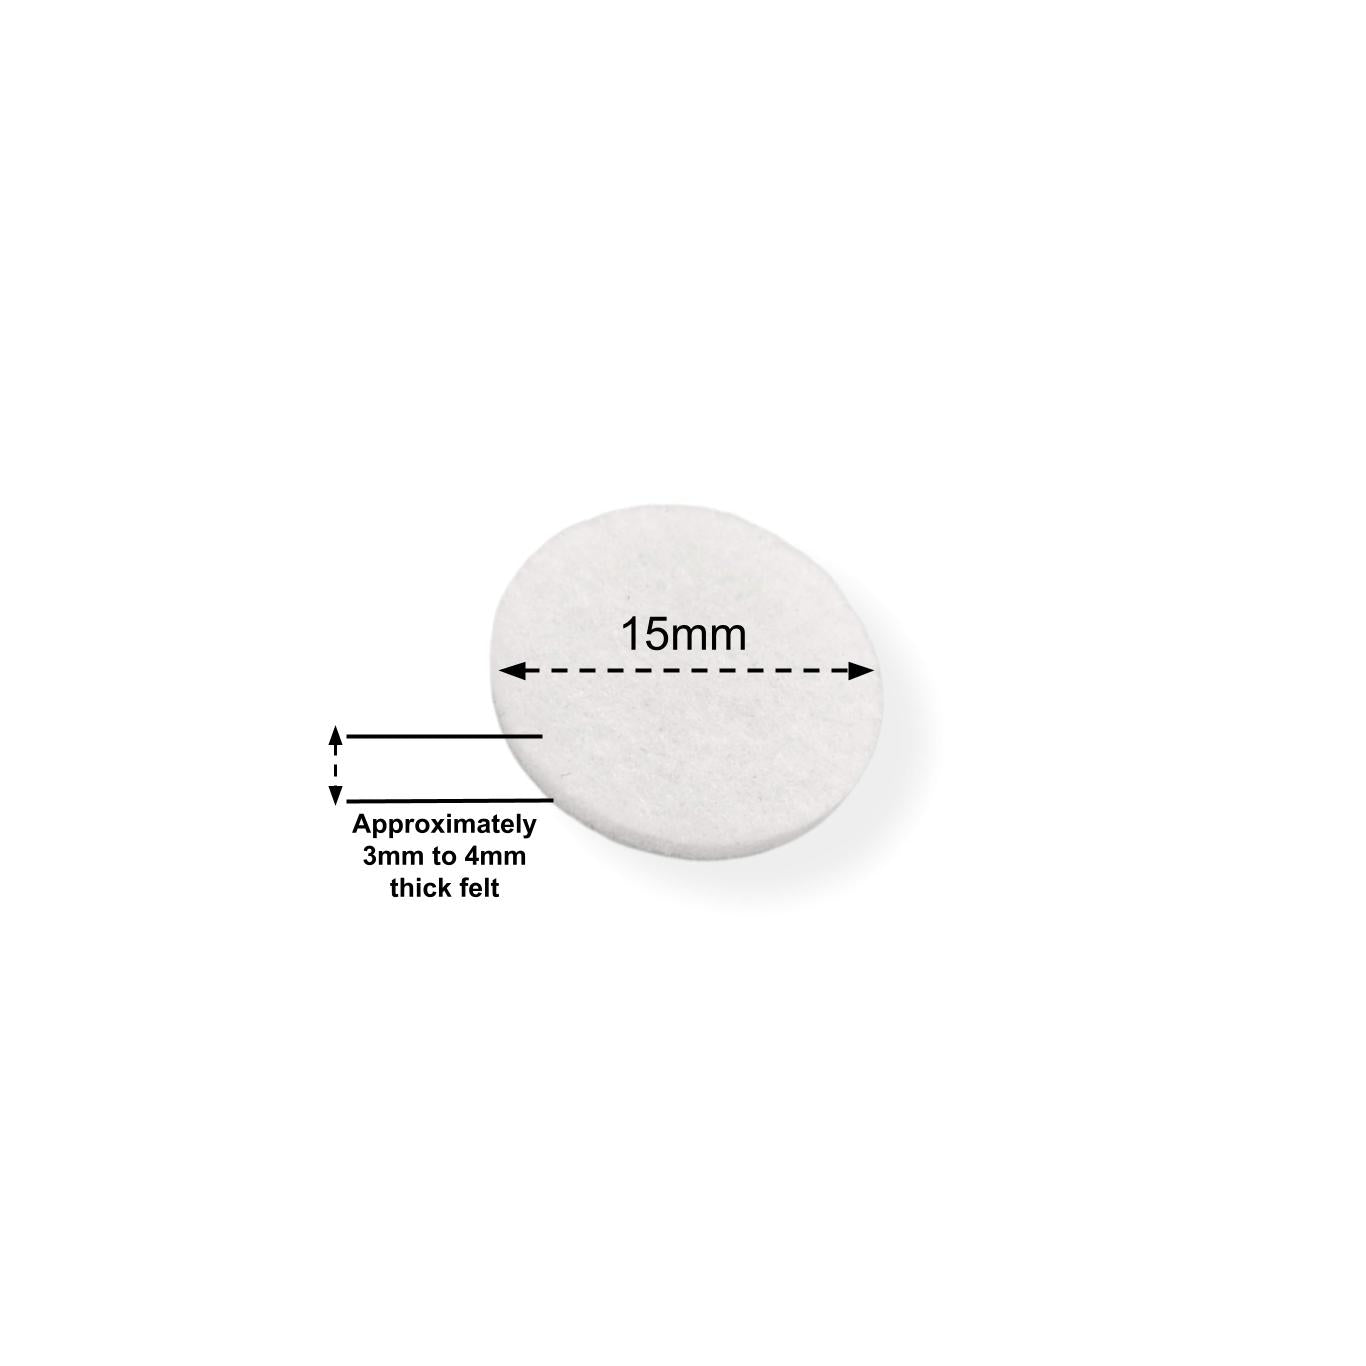 Felt Pads - White Self Adhesive Stick on Felt - Round 15mm Diameter - Made in Germany - Keay Vital Parts